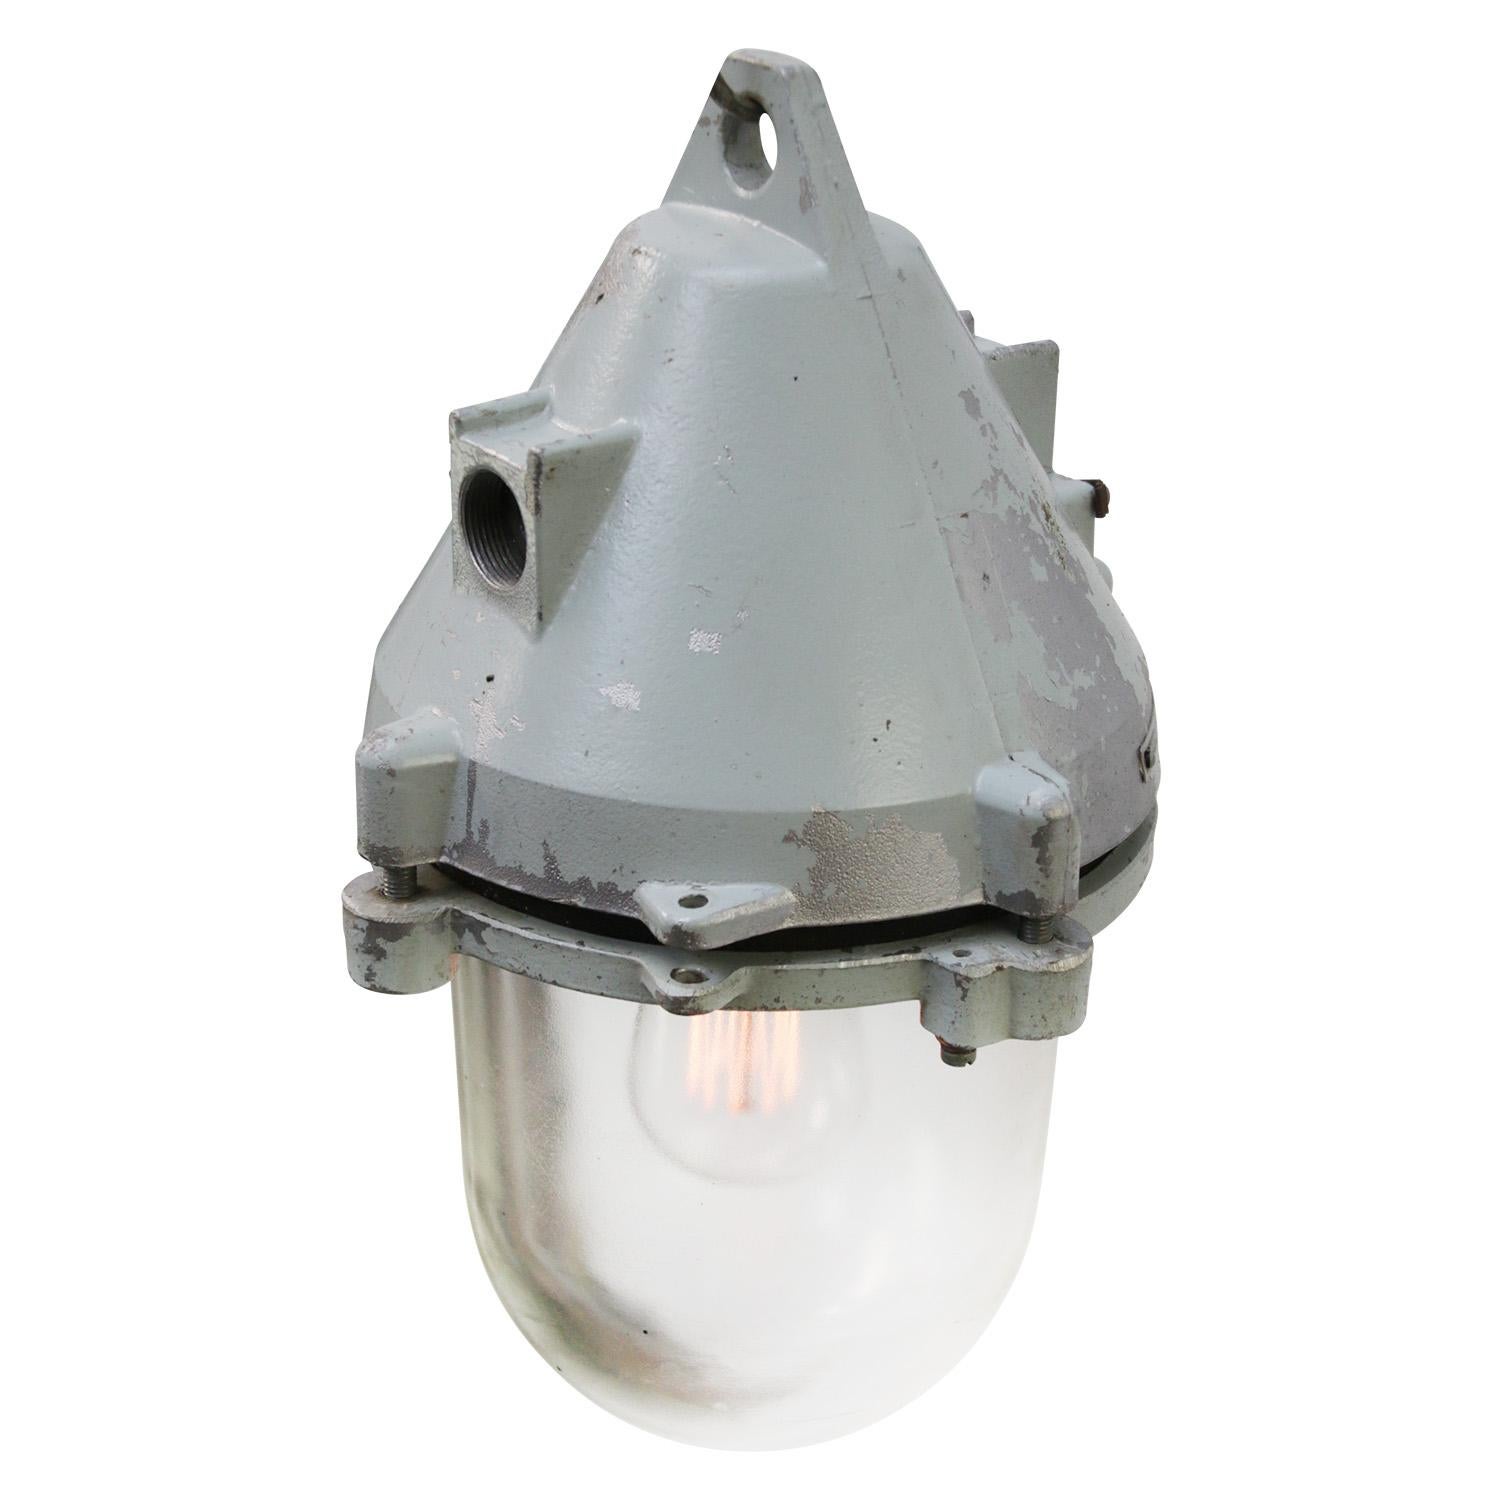 Industrial hanging lamp
Gray aluminum clear glass

Weight: 5.00 kg / 11 lb

Priced per individual item. All lamps have been made suitable by international standards for incandescent light bulbs, energy-efficient and LED bulbs. E26/E27 bulb